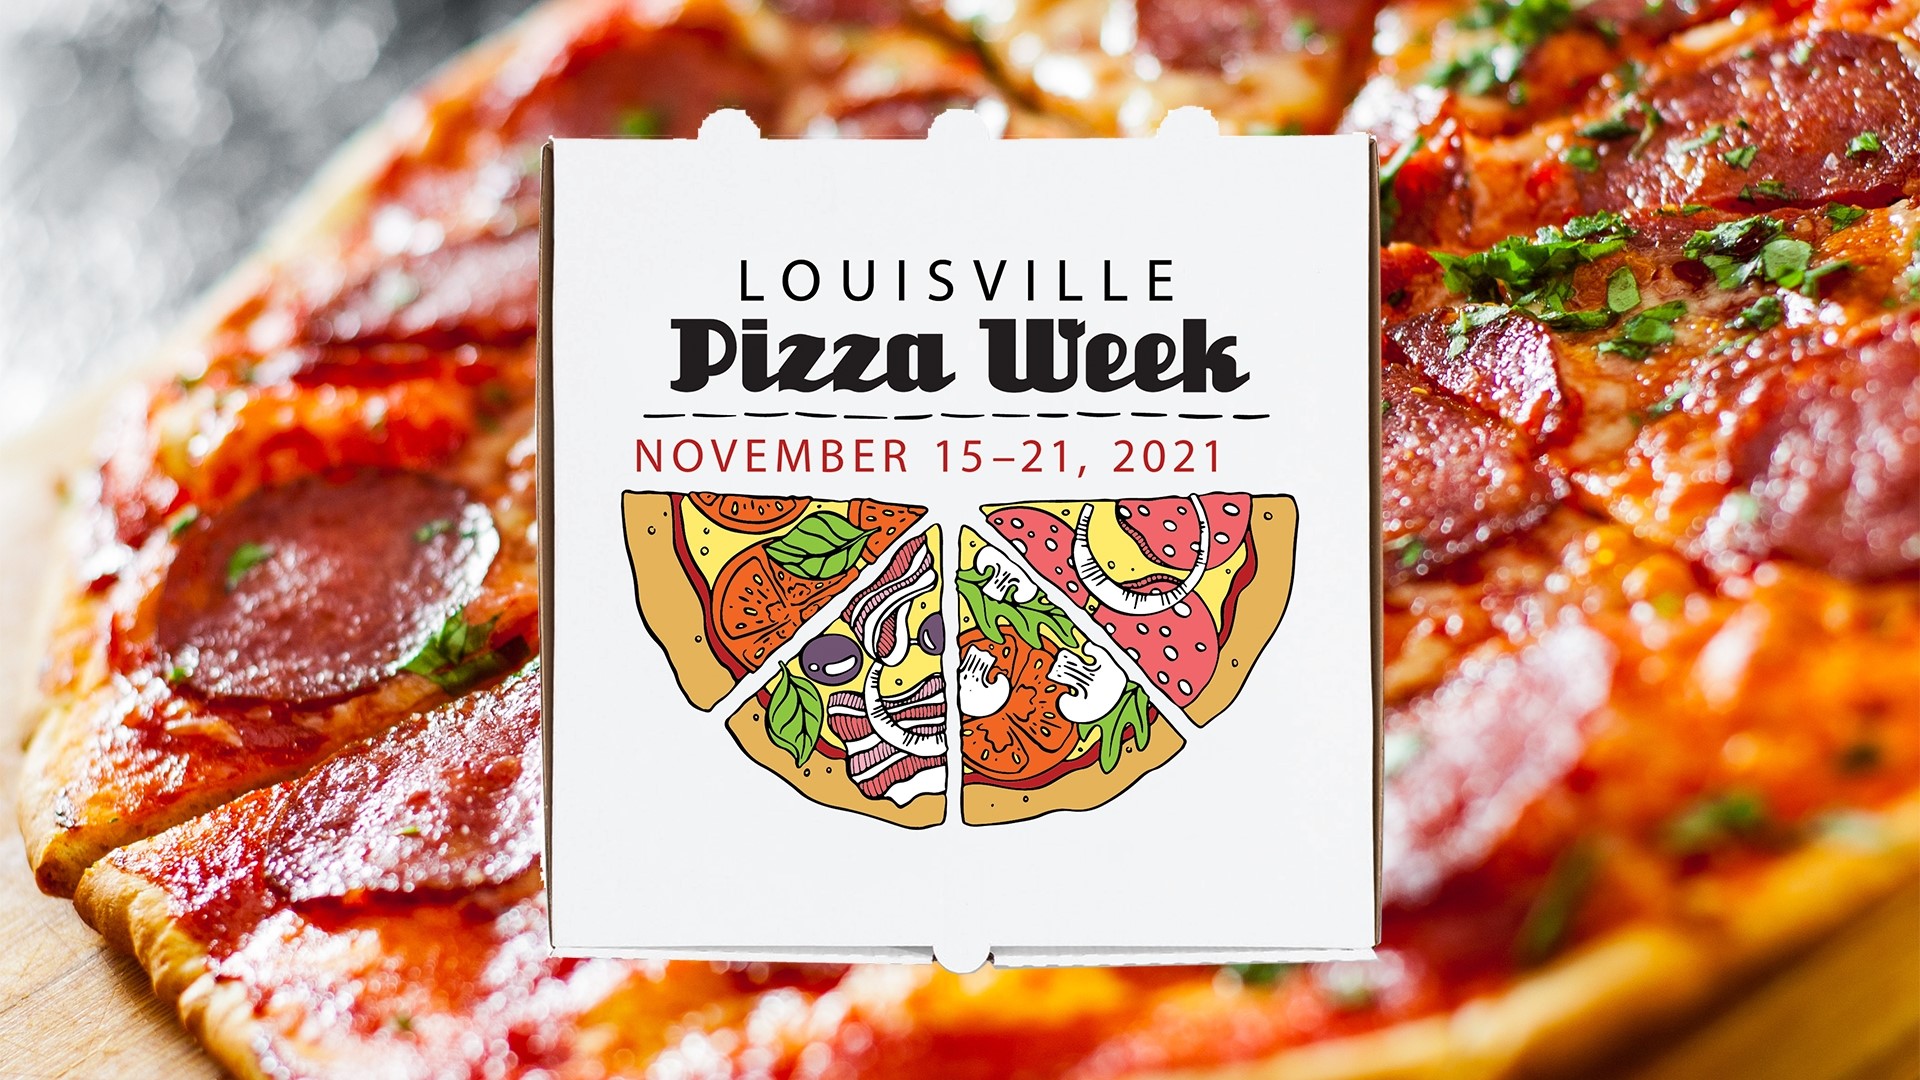 Participating restaurants across Louisville and Southern Indiana will be offering $9 pizzas from Nov. 15 through Nov. 21.